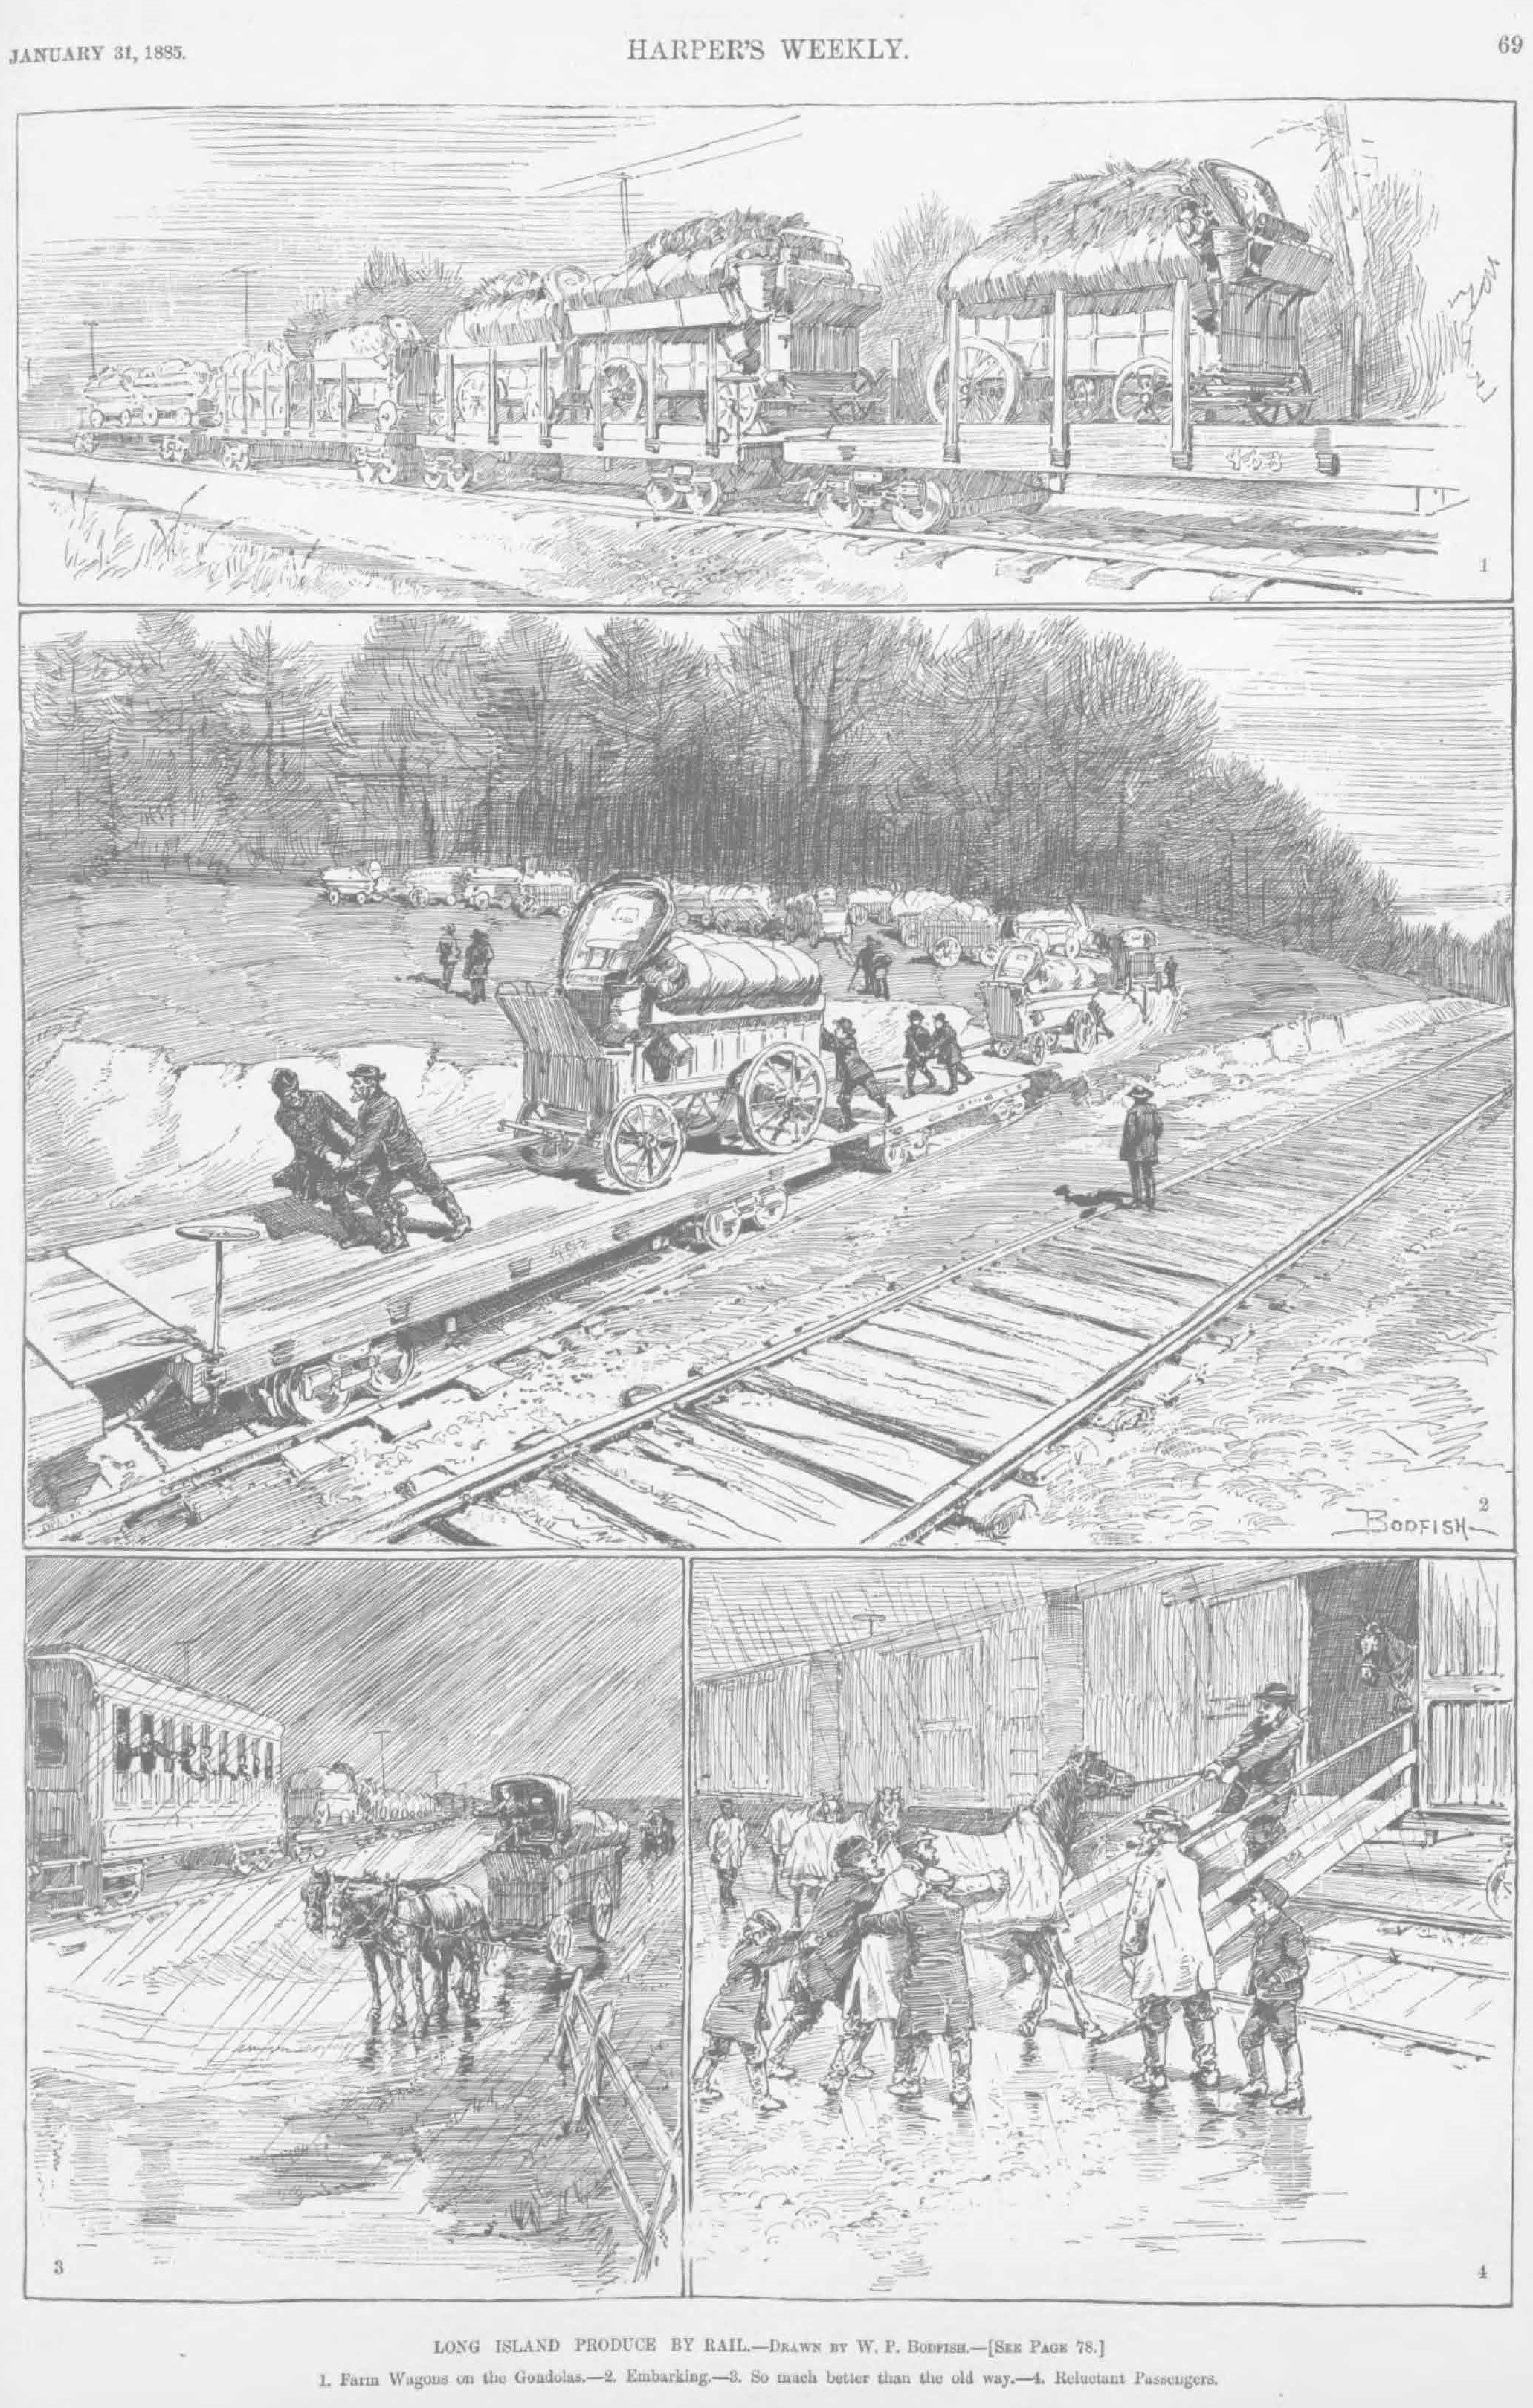  The railroad briefly carried loaded farm wagons, as well as their horses, to city markets. Harper’s Weekly, 1885. 